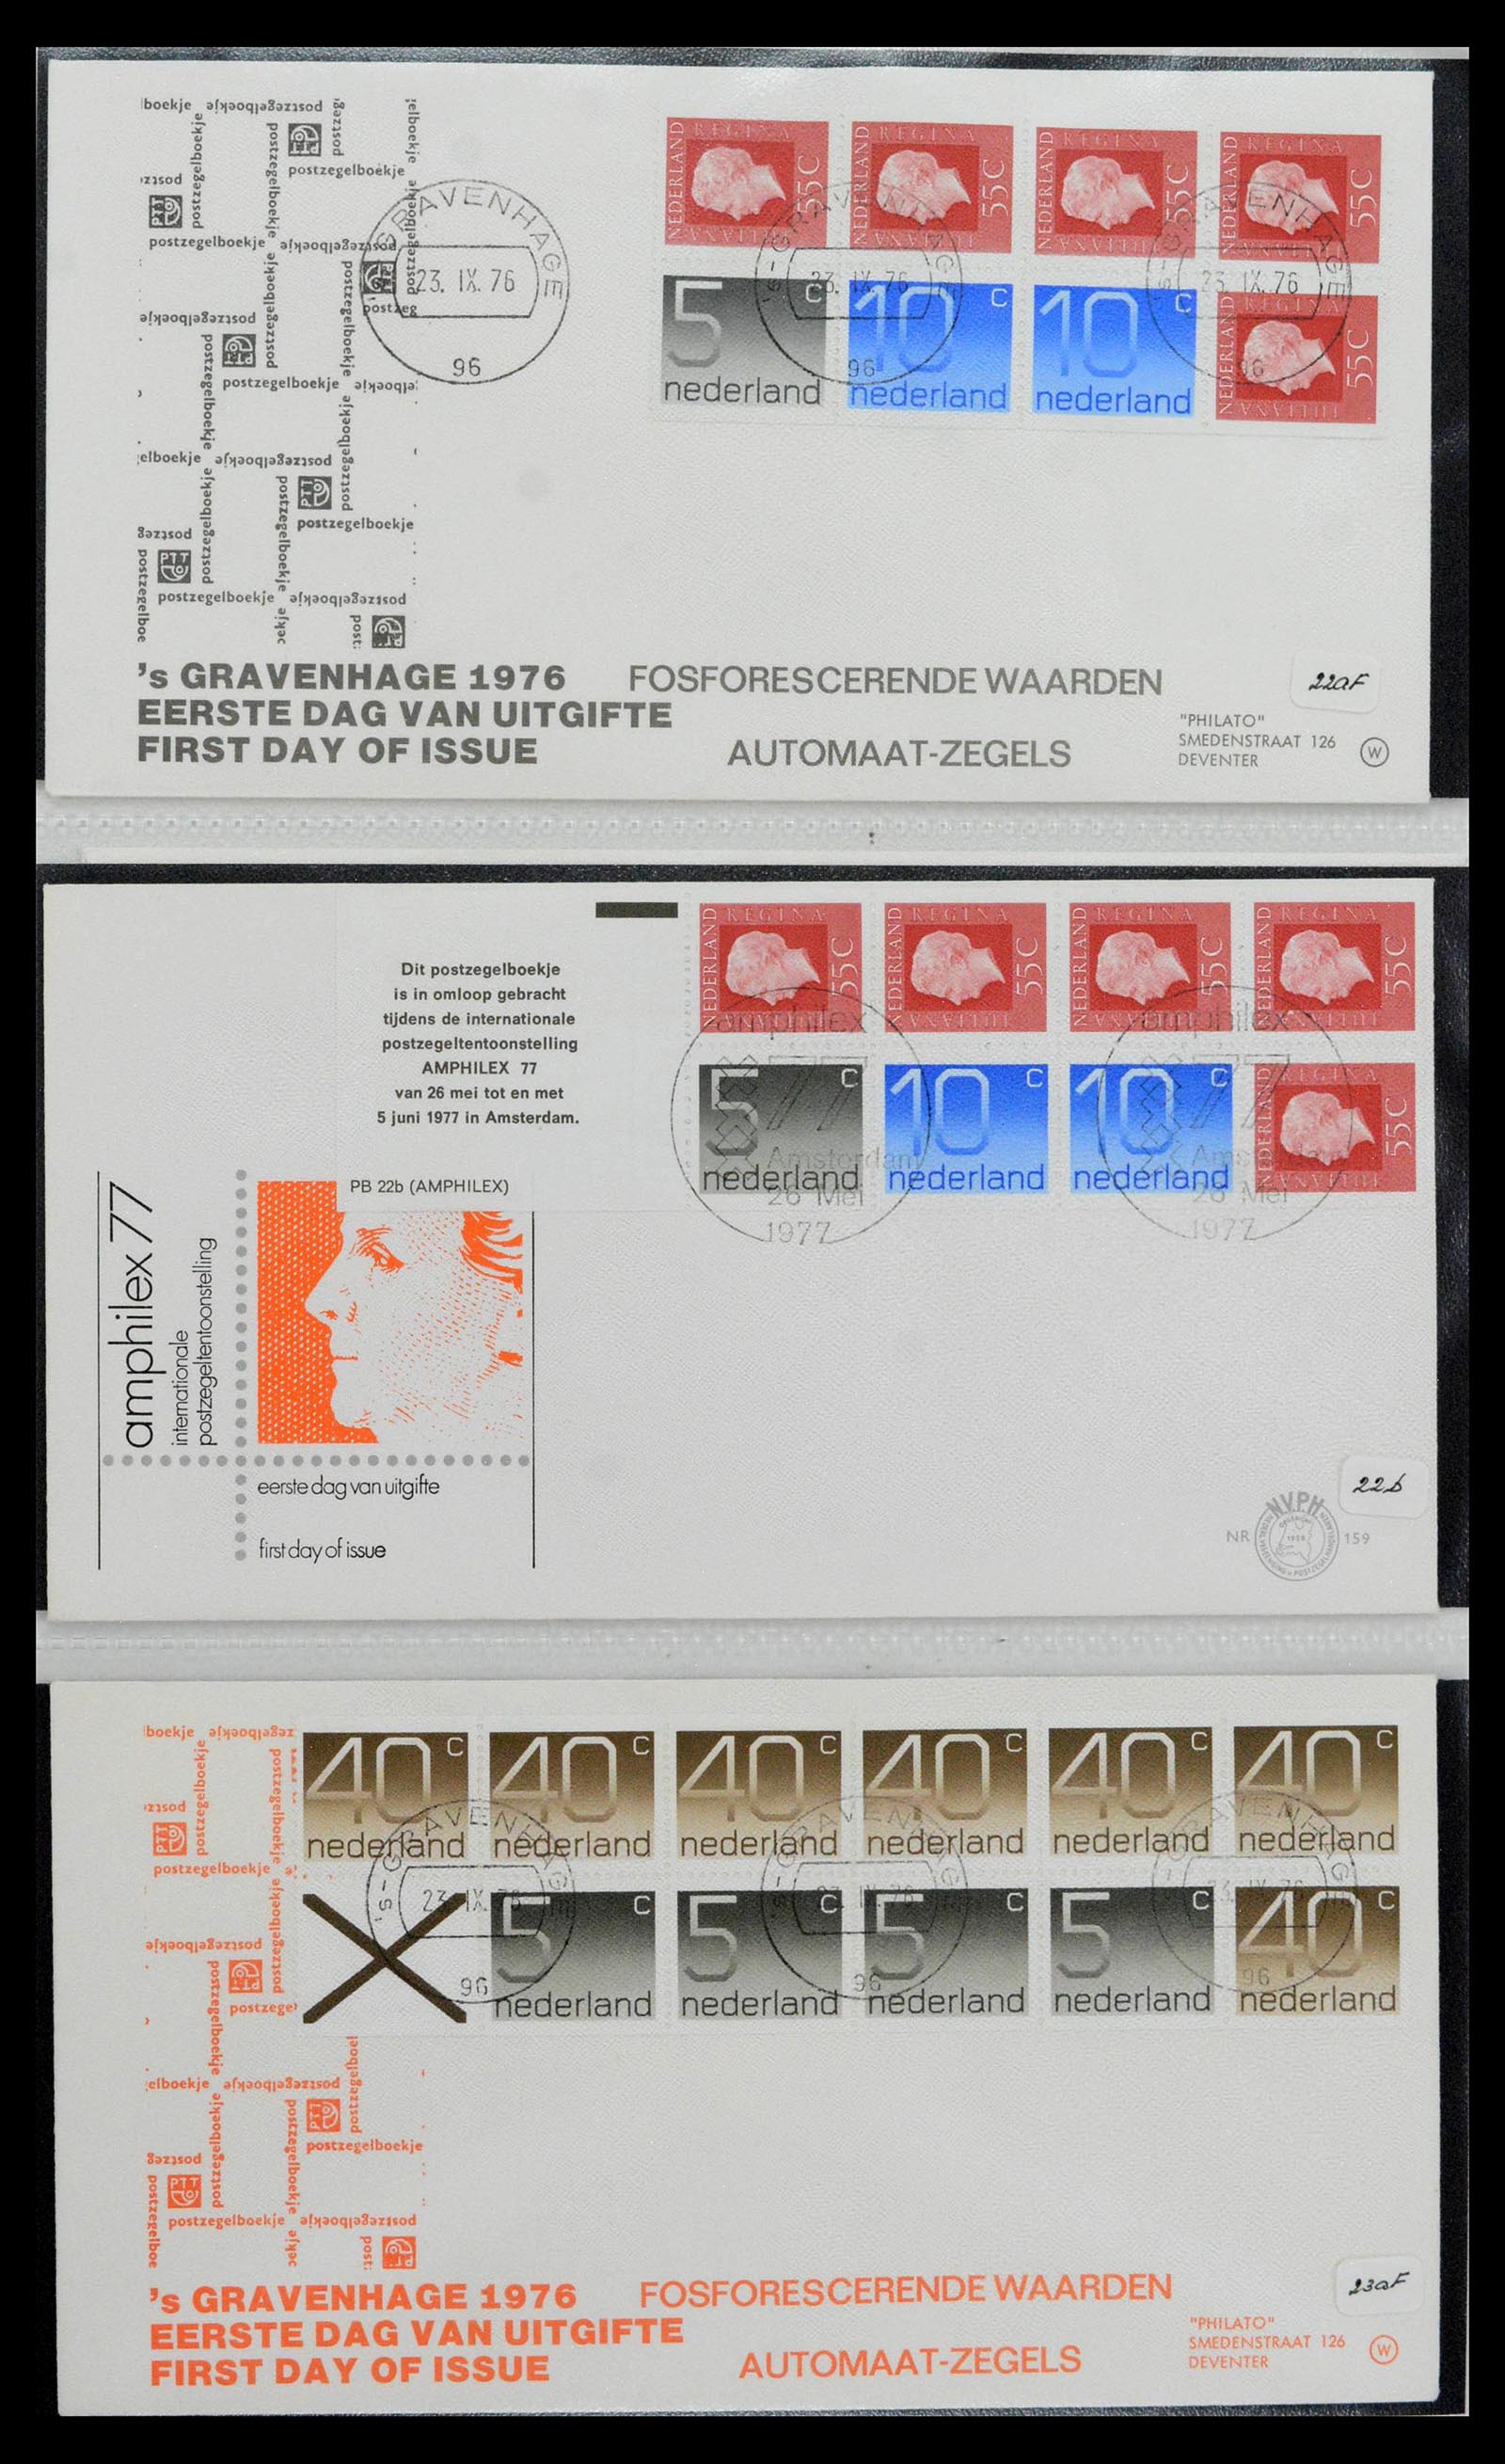 38559 0071 - Stamp collection 38559 Netherlands special first day covers.